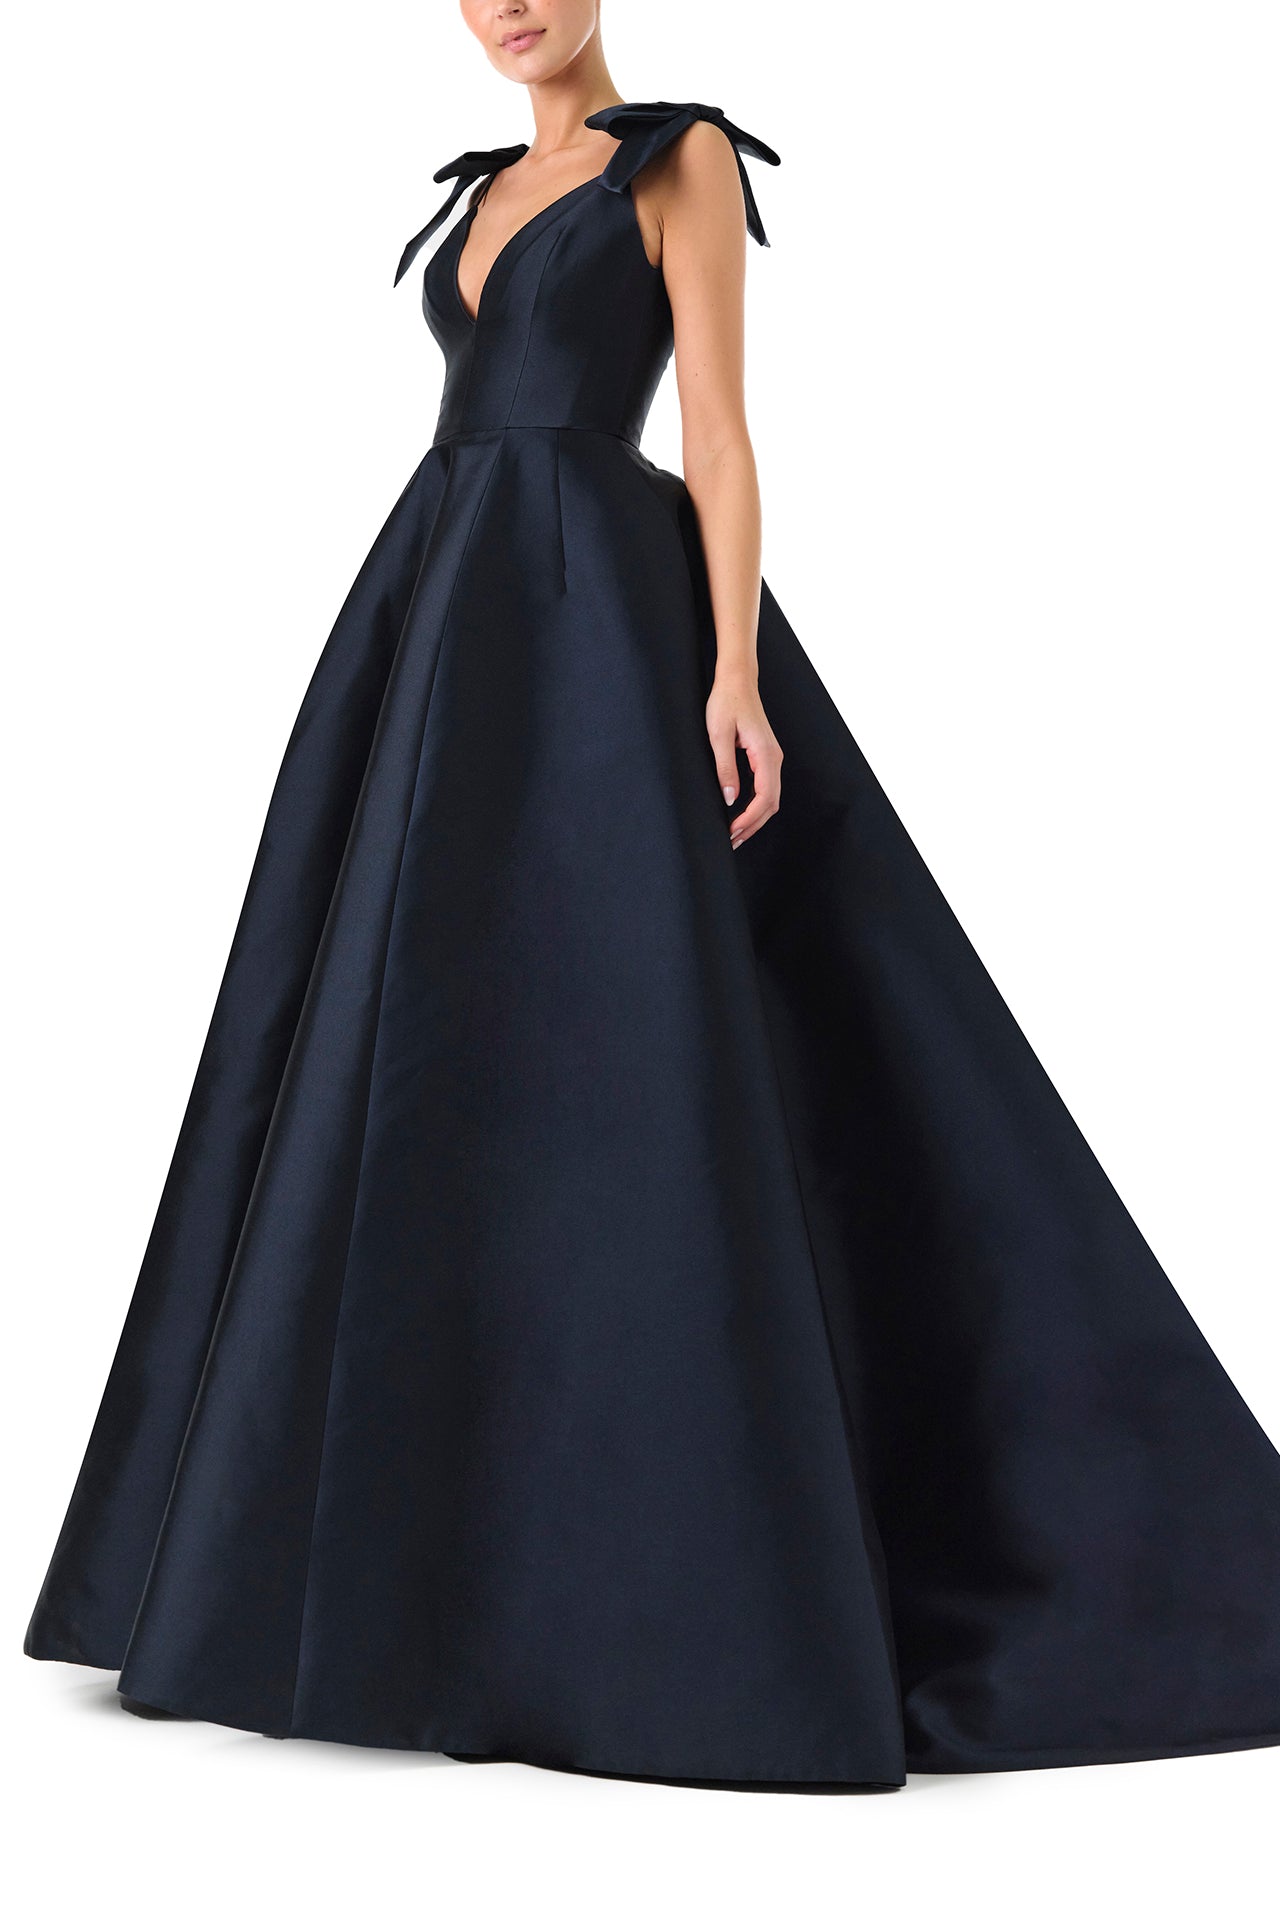 Monique Lhuillier Fall 2024 deep V-neck ball gown in navy mikado with full skirt and bow detail at shoulders - left side.